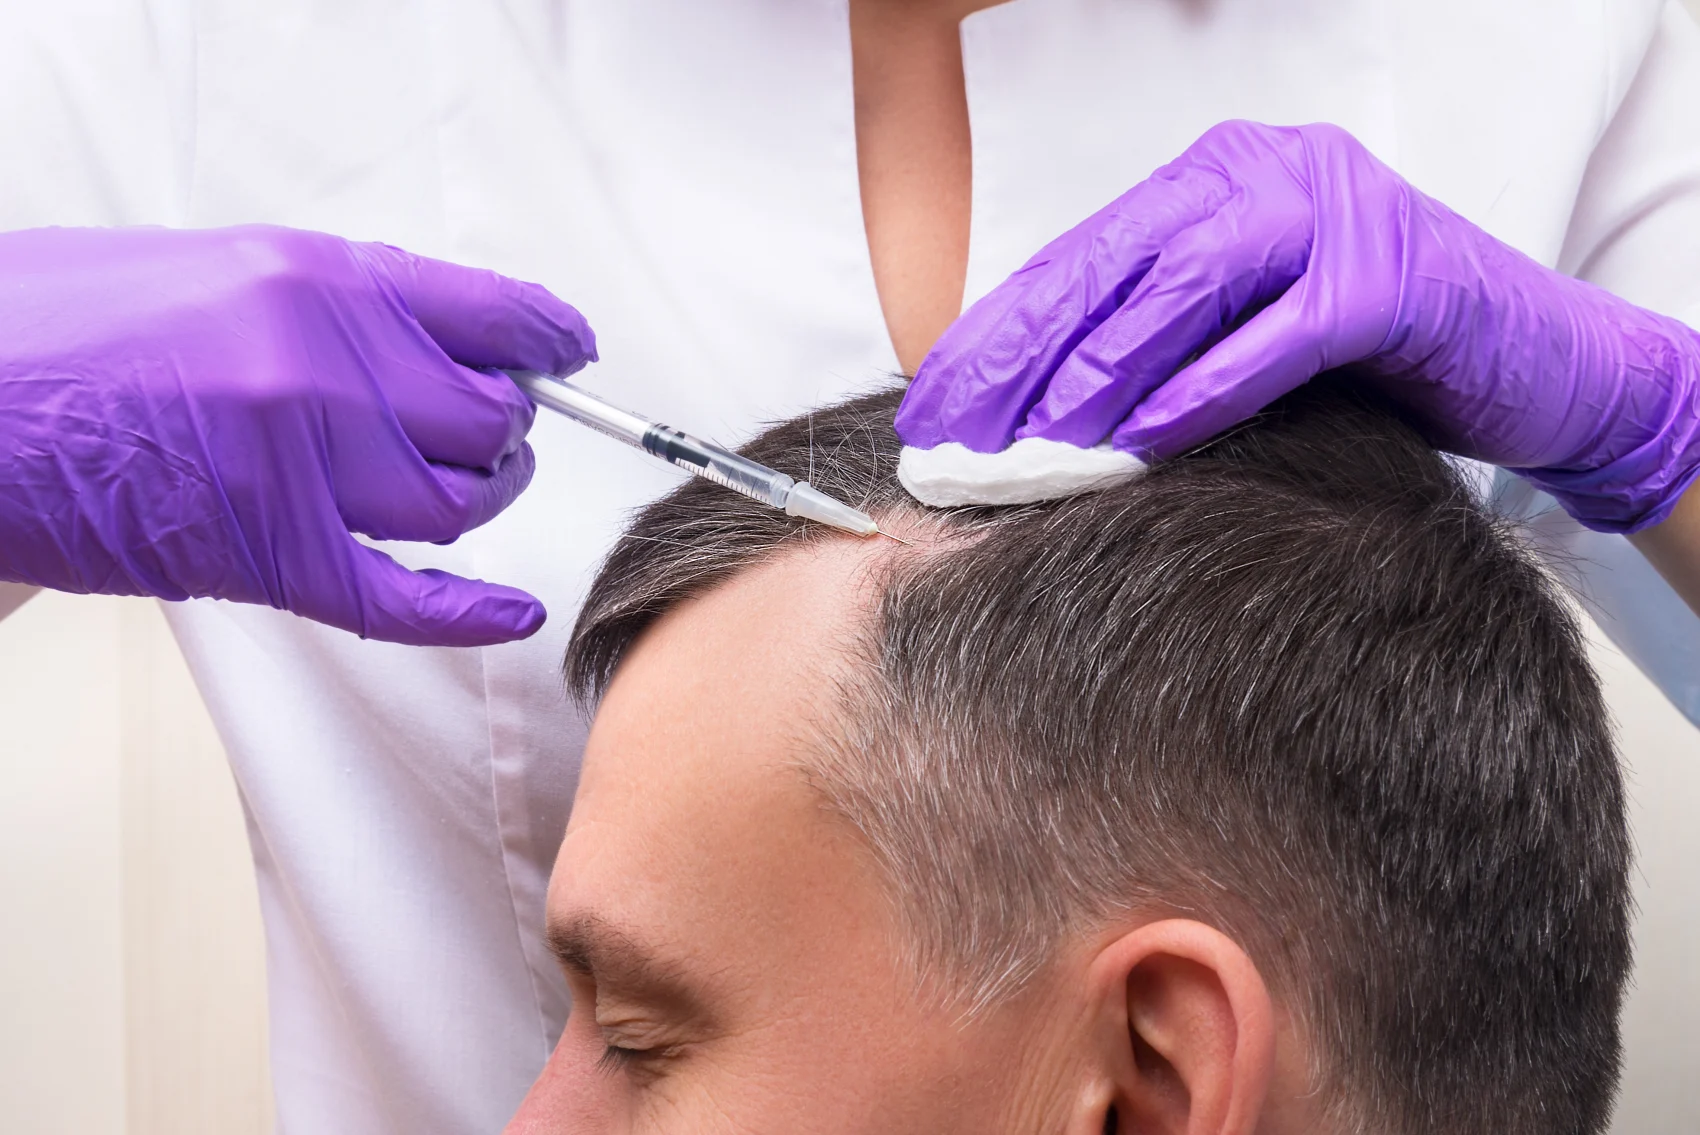 Man getting PRP therapy done on his balding head